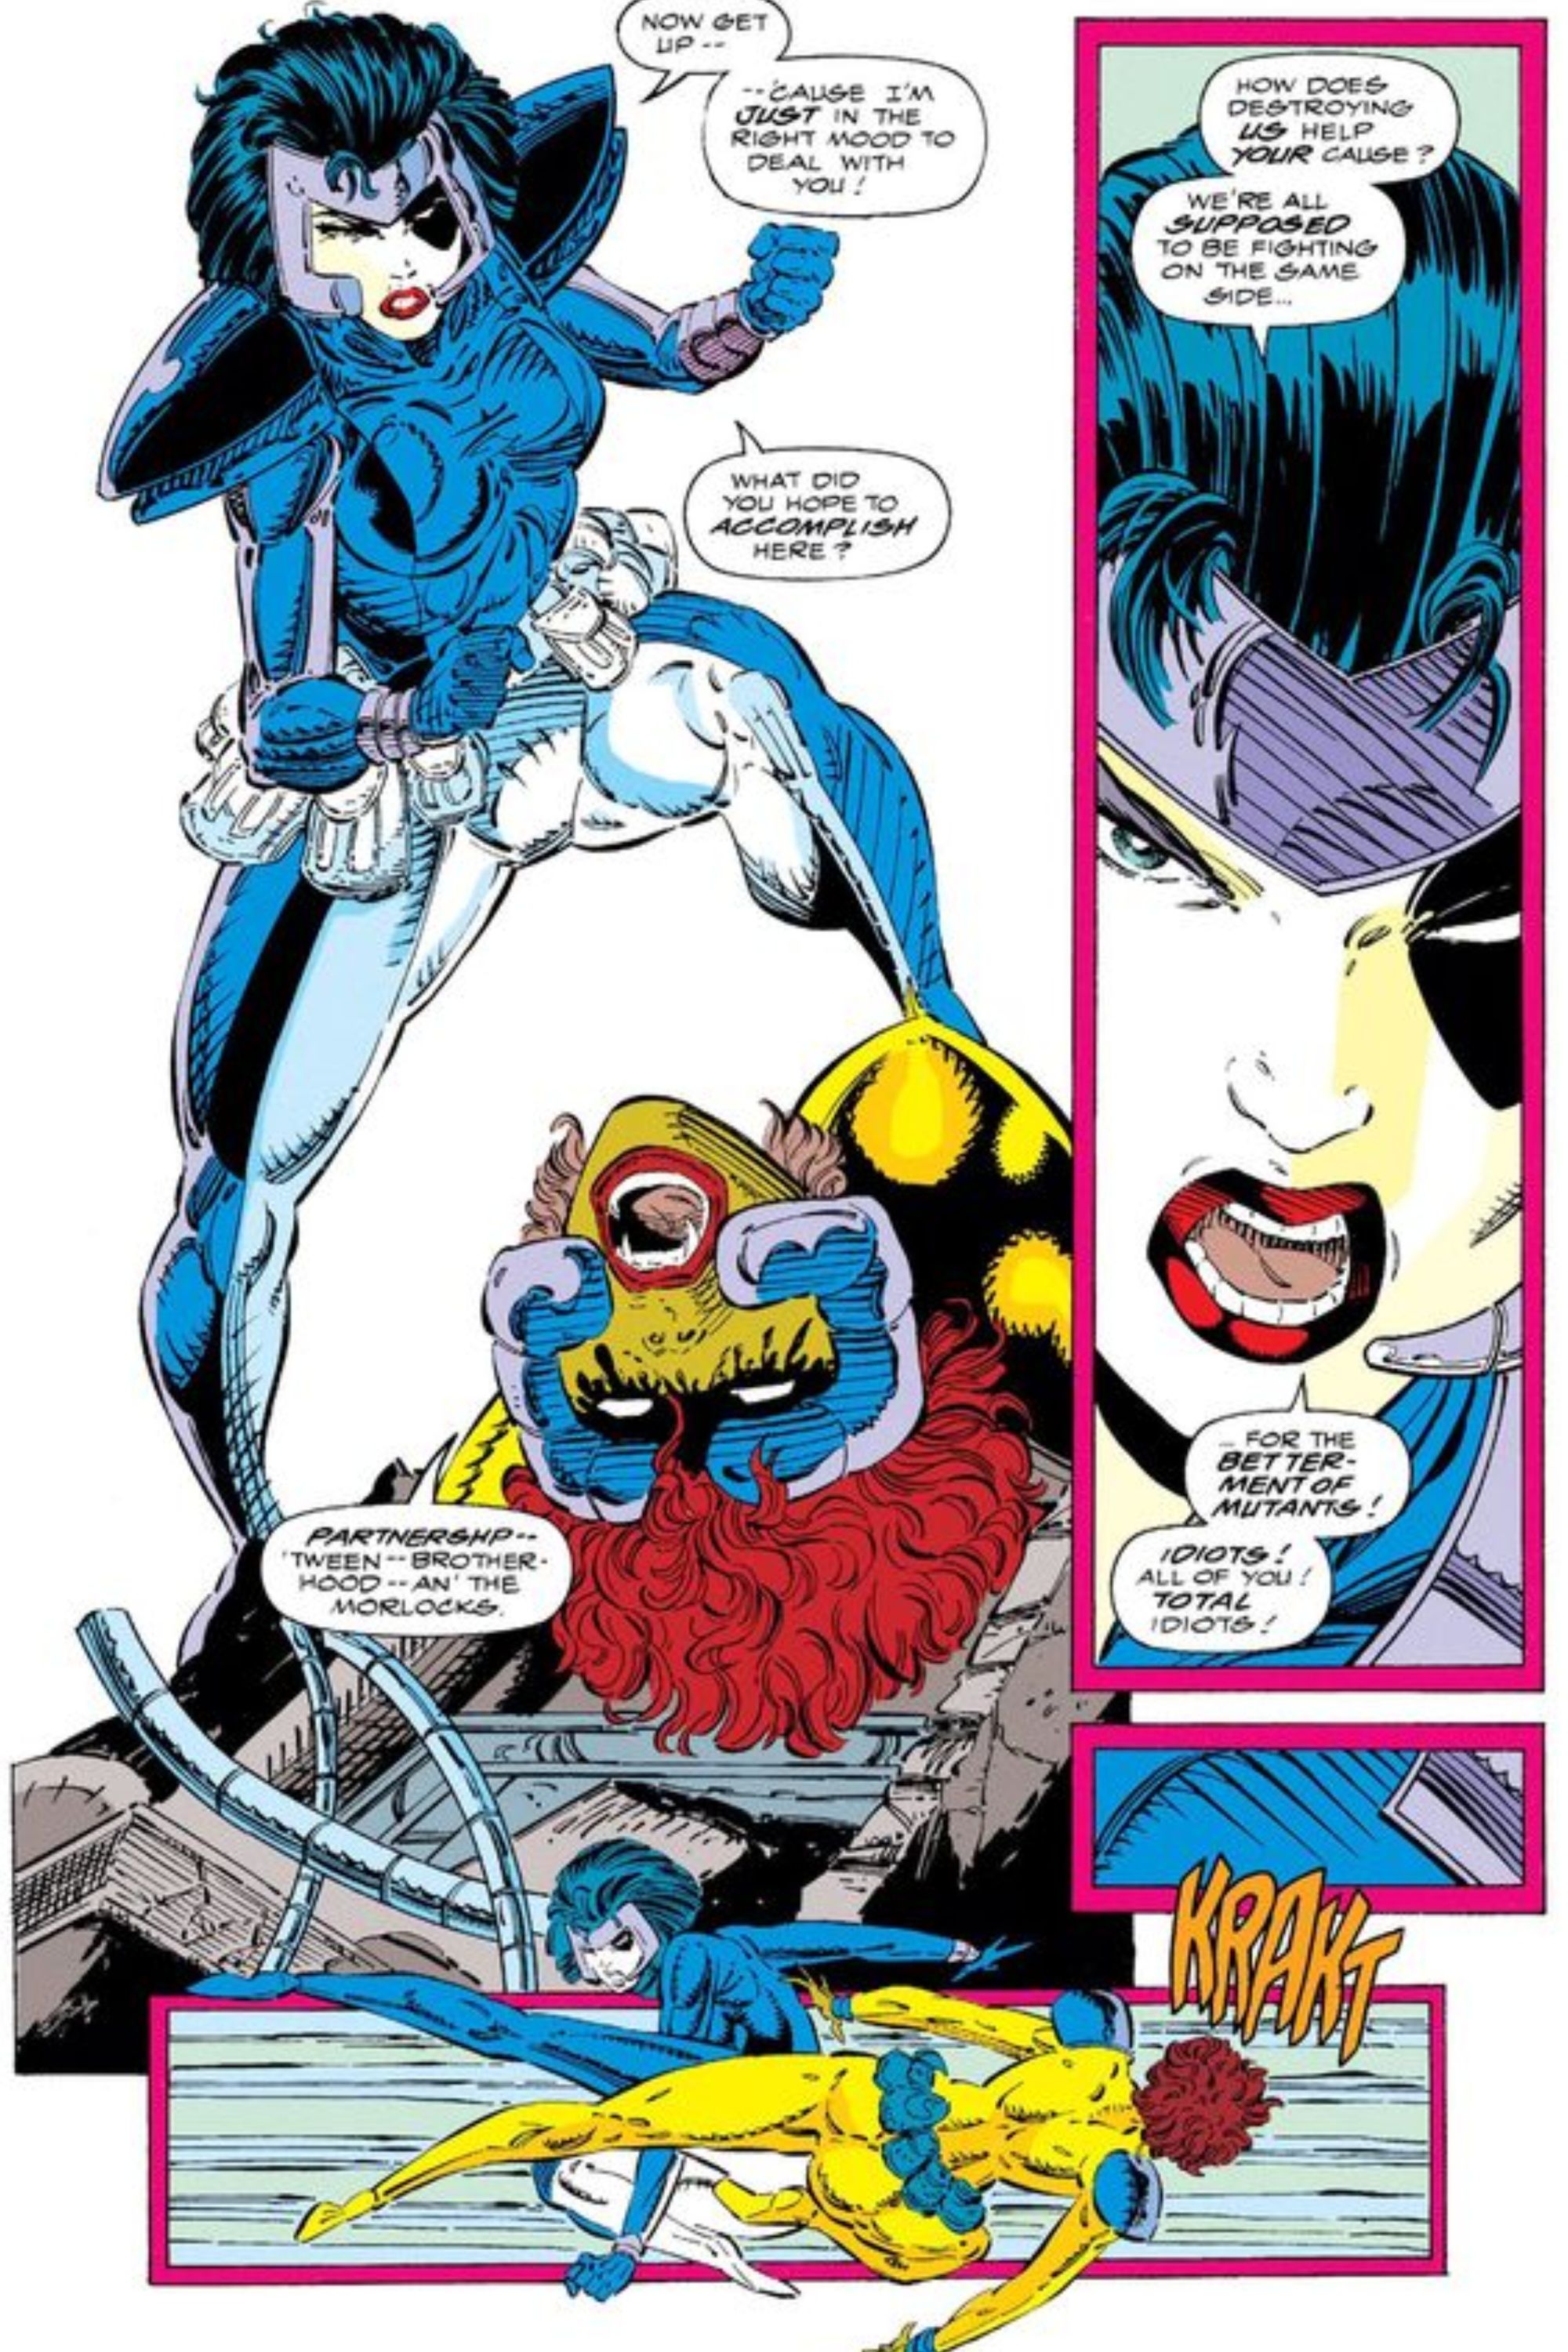 Copycat as Domino standing over someone in X-Force vol 1 #9.